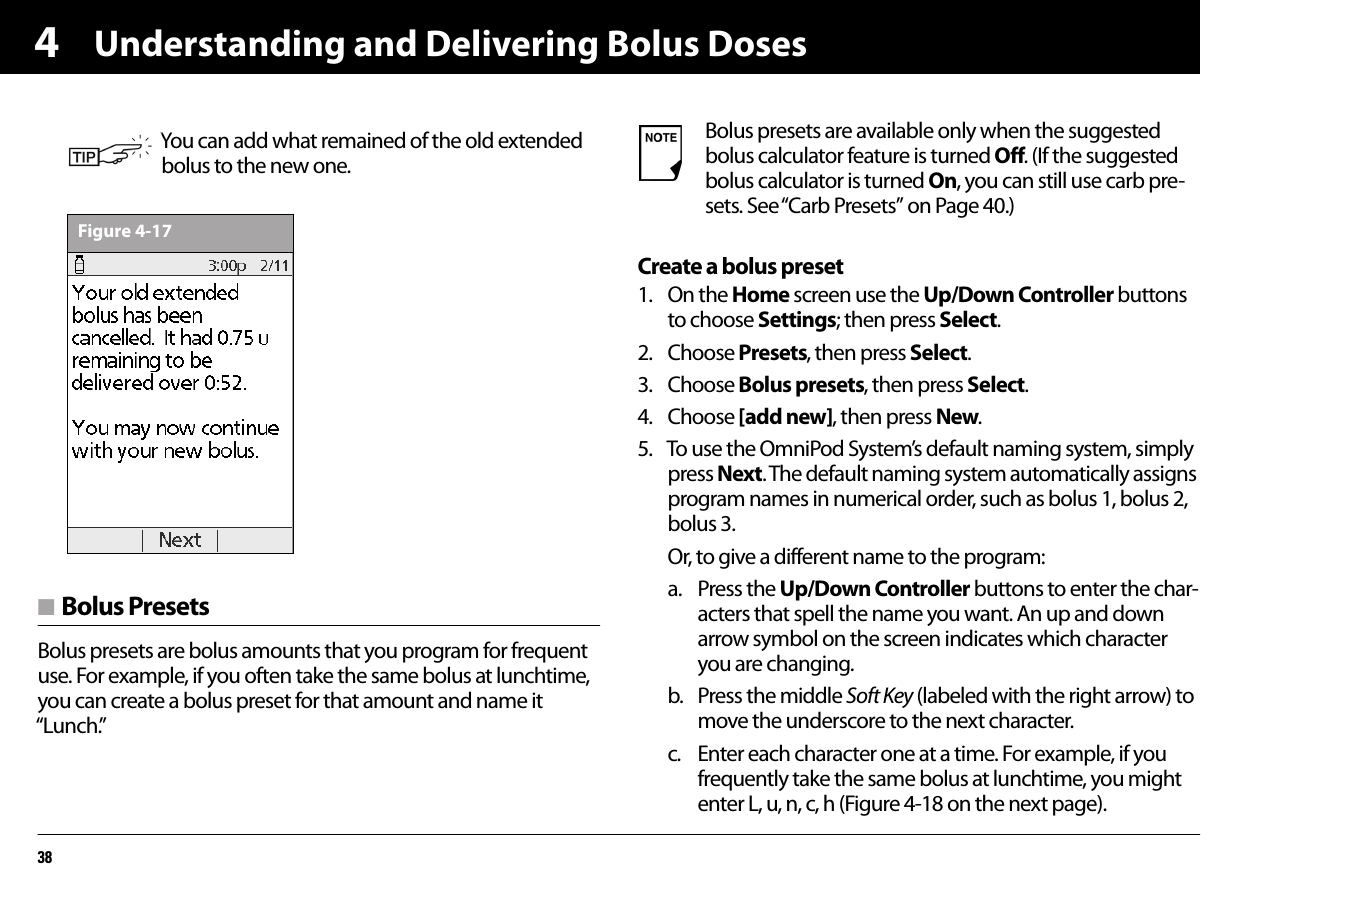 Understanding and Delivering Bolus Doses384n Bolus PresetsBolus presets are bolus amounts that you program for frequent use. For example, if you often take the same bolus at lunchtime, you can create a bolus preset for that amount and name it “Lunch.”Create a bolus preset1. On the Home screen use the Up/Down Controller buttons to choose Settings; then press Select.2. Choose Presets, then press Select.3. Choose Bolus presets, then press Select.4. Choose [add new], then press New.5. To use the OmniPod System’s default naming system, simply press Next. The default naming system automatically assigns program names in numerical order, such as bolus 1, bolus 2, bolus 3.Or, to give a different name to the program:a. Press the Up/Down Controller buttons to enter the char-acters that spell the name you want. An up and down arrow symbol on the screen indicates which character you are changing.b. Press the middle Soft Key (labeled with the right arrow) to move the underscore to the next character.c. Enter each character one at a time. For example, if you frequently take the same bolus at lunchtime, you might enter L, u, n, c, h (Figure 4-18 on the next page).You can add what remained of the old extended bolus to the new one.Figure 4-17Bolus presets are available only when the suggested bolus calculator feature is turned Off. (If the suggested bolus calculator is turned On, you can still use carb pre-sets. See “Carb Presets” on Page 40.)